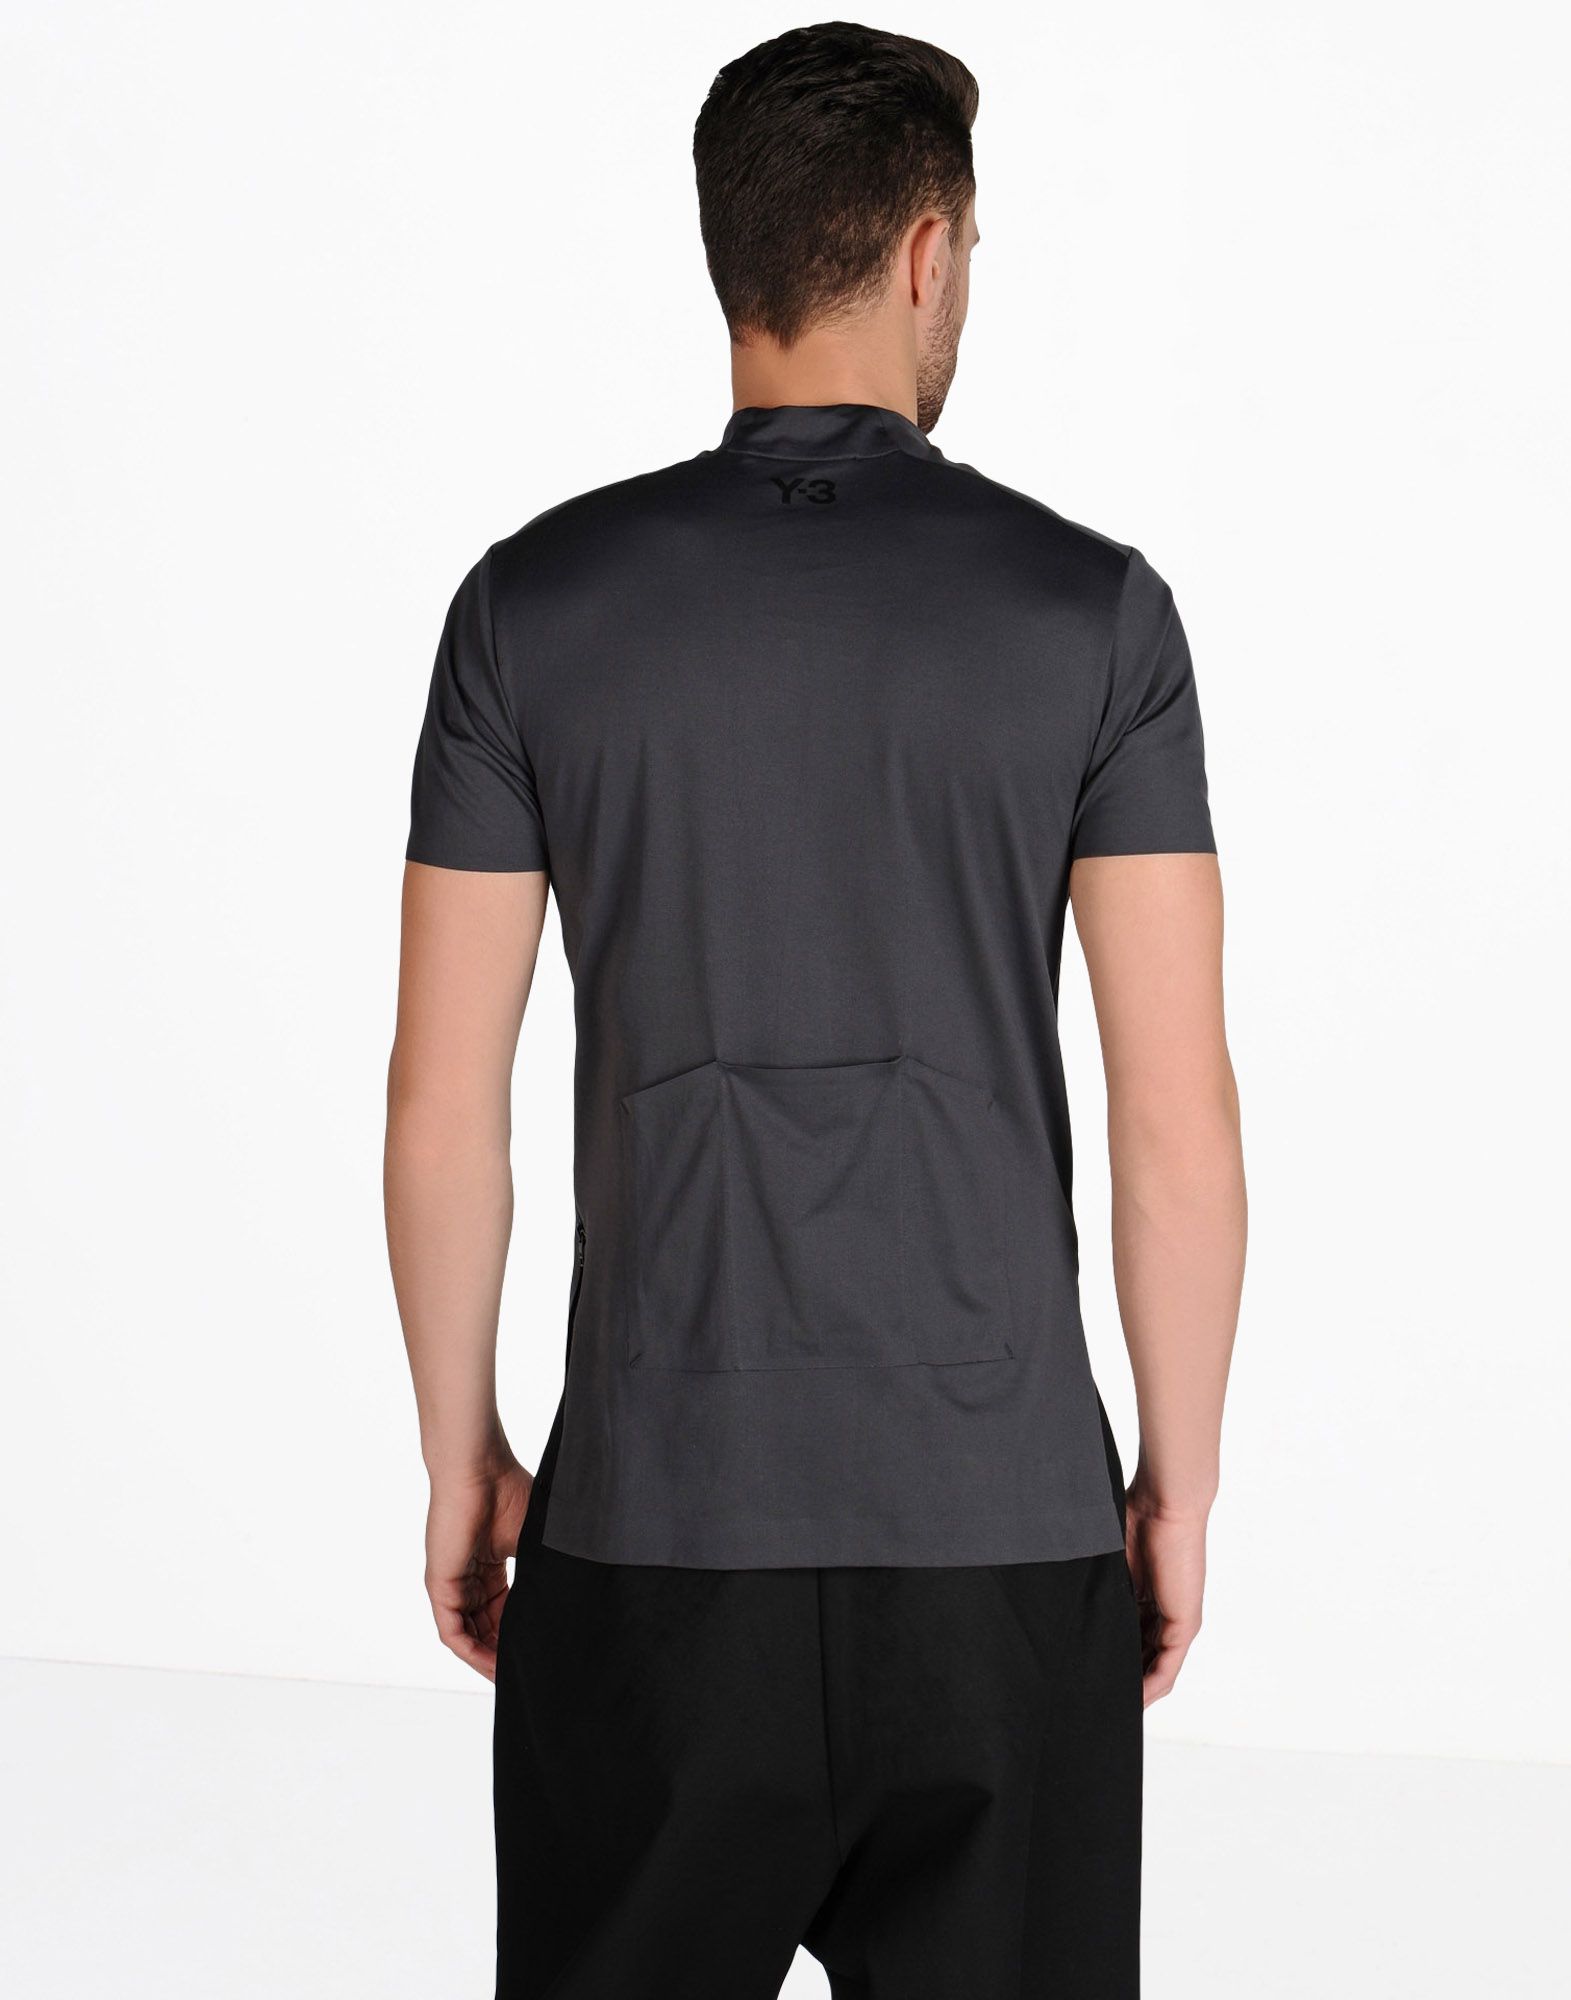 Y 3 ZIP LONG SHIRT ‎ ‎Short Sleeve t Shirts‎ ‎ ‎ | Adidas Y-3 Official Site